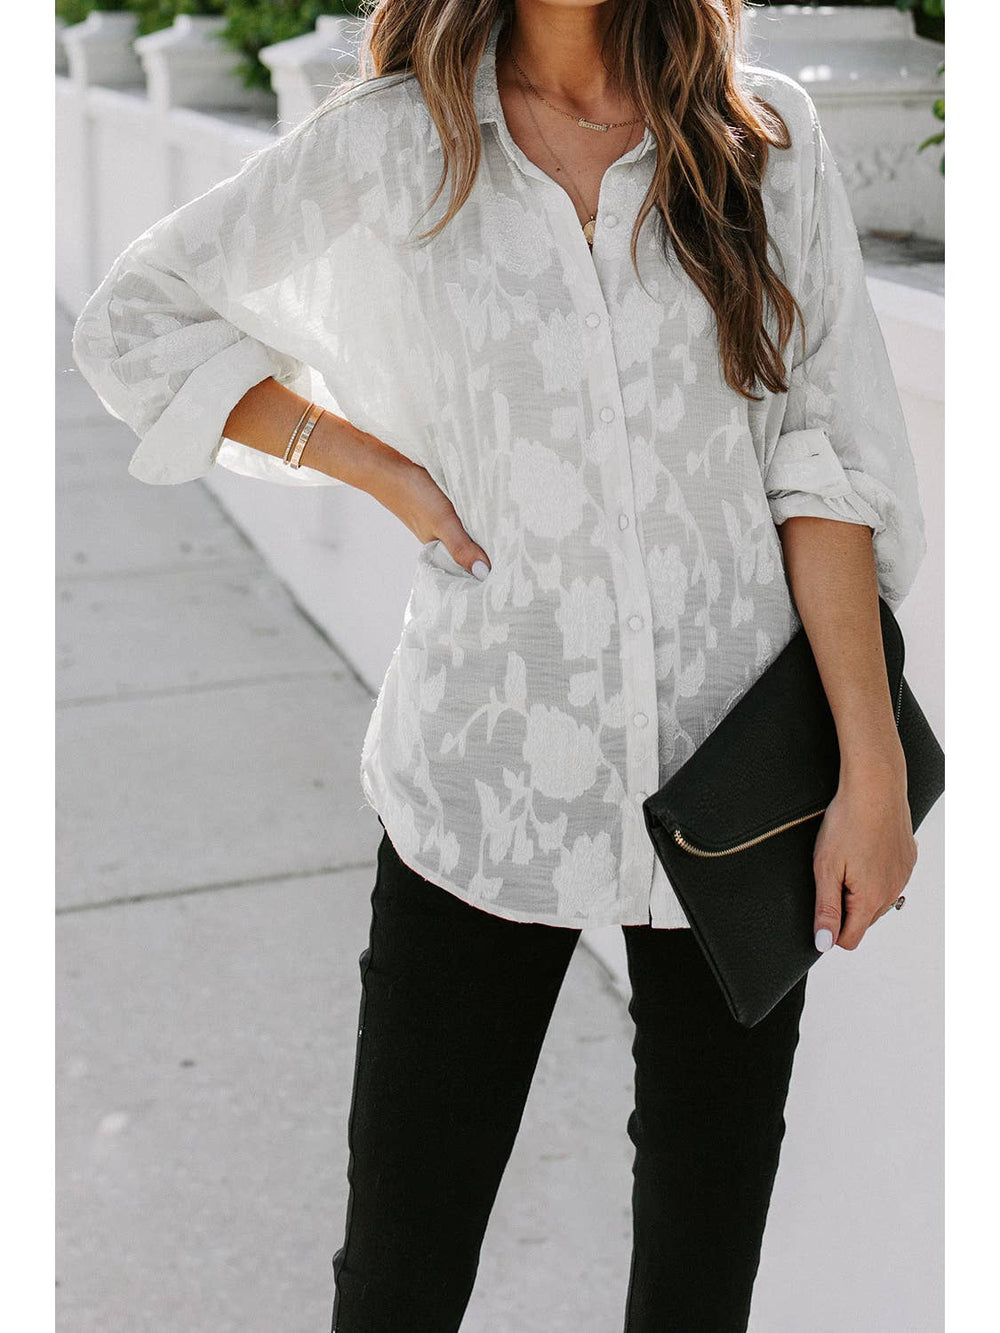 Summer Thin Sheer Top Women Solid Color Long-Sleeved Shirt